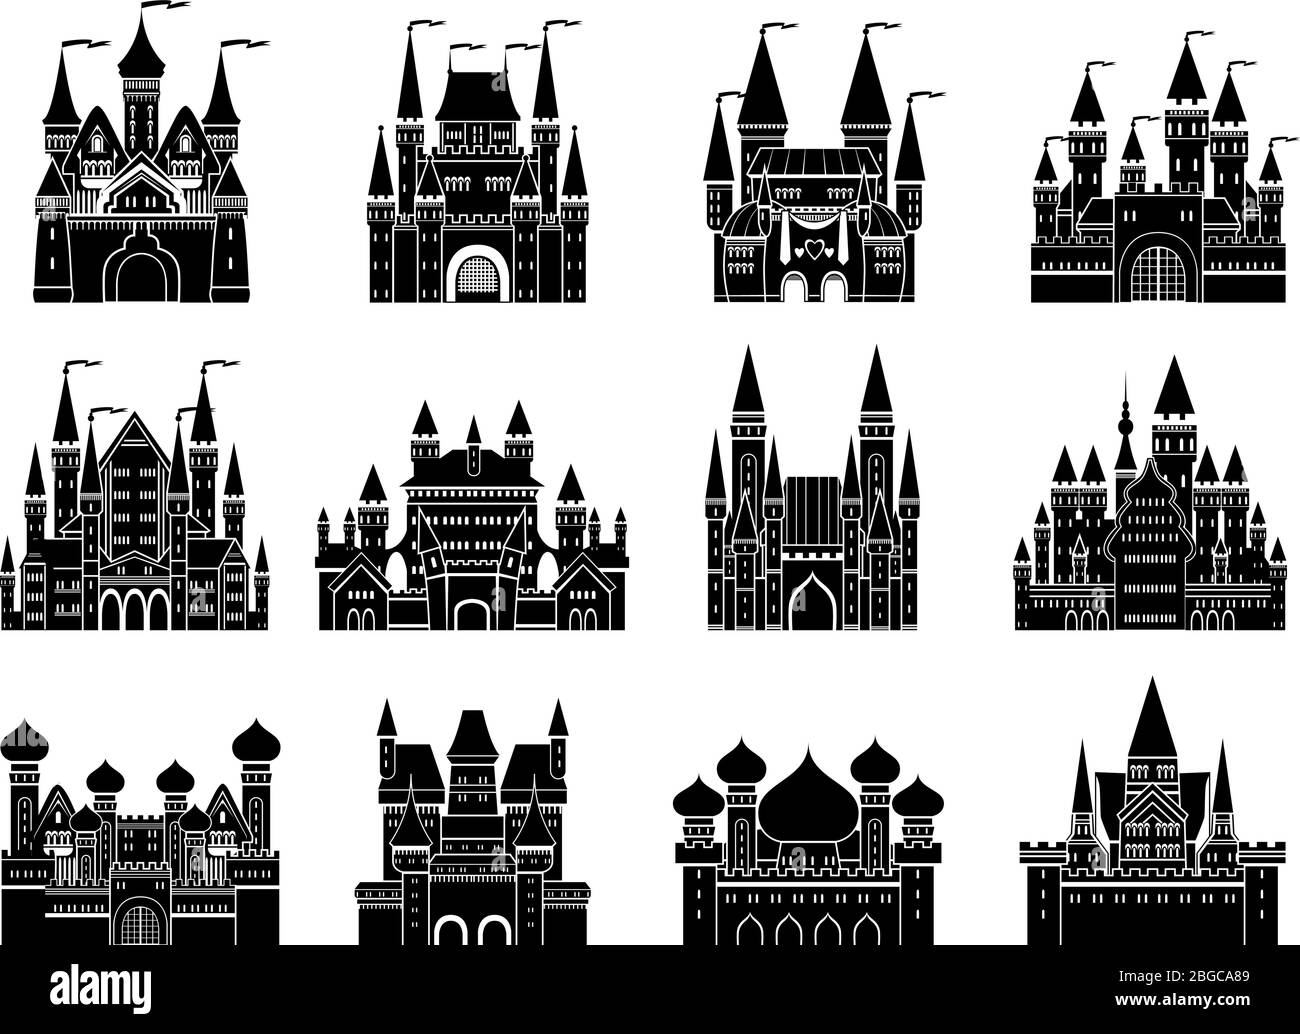 Monochrome vector illustrations set with different medieval old castles and towers Stock Vector